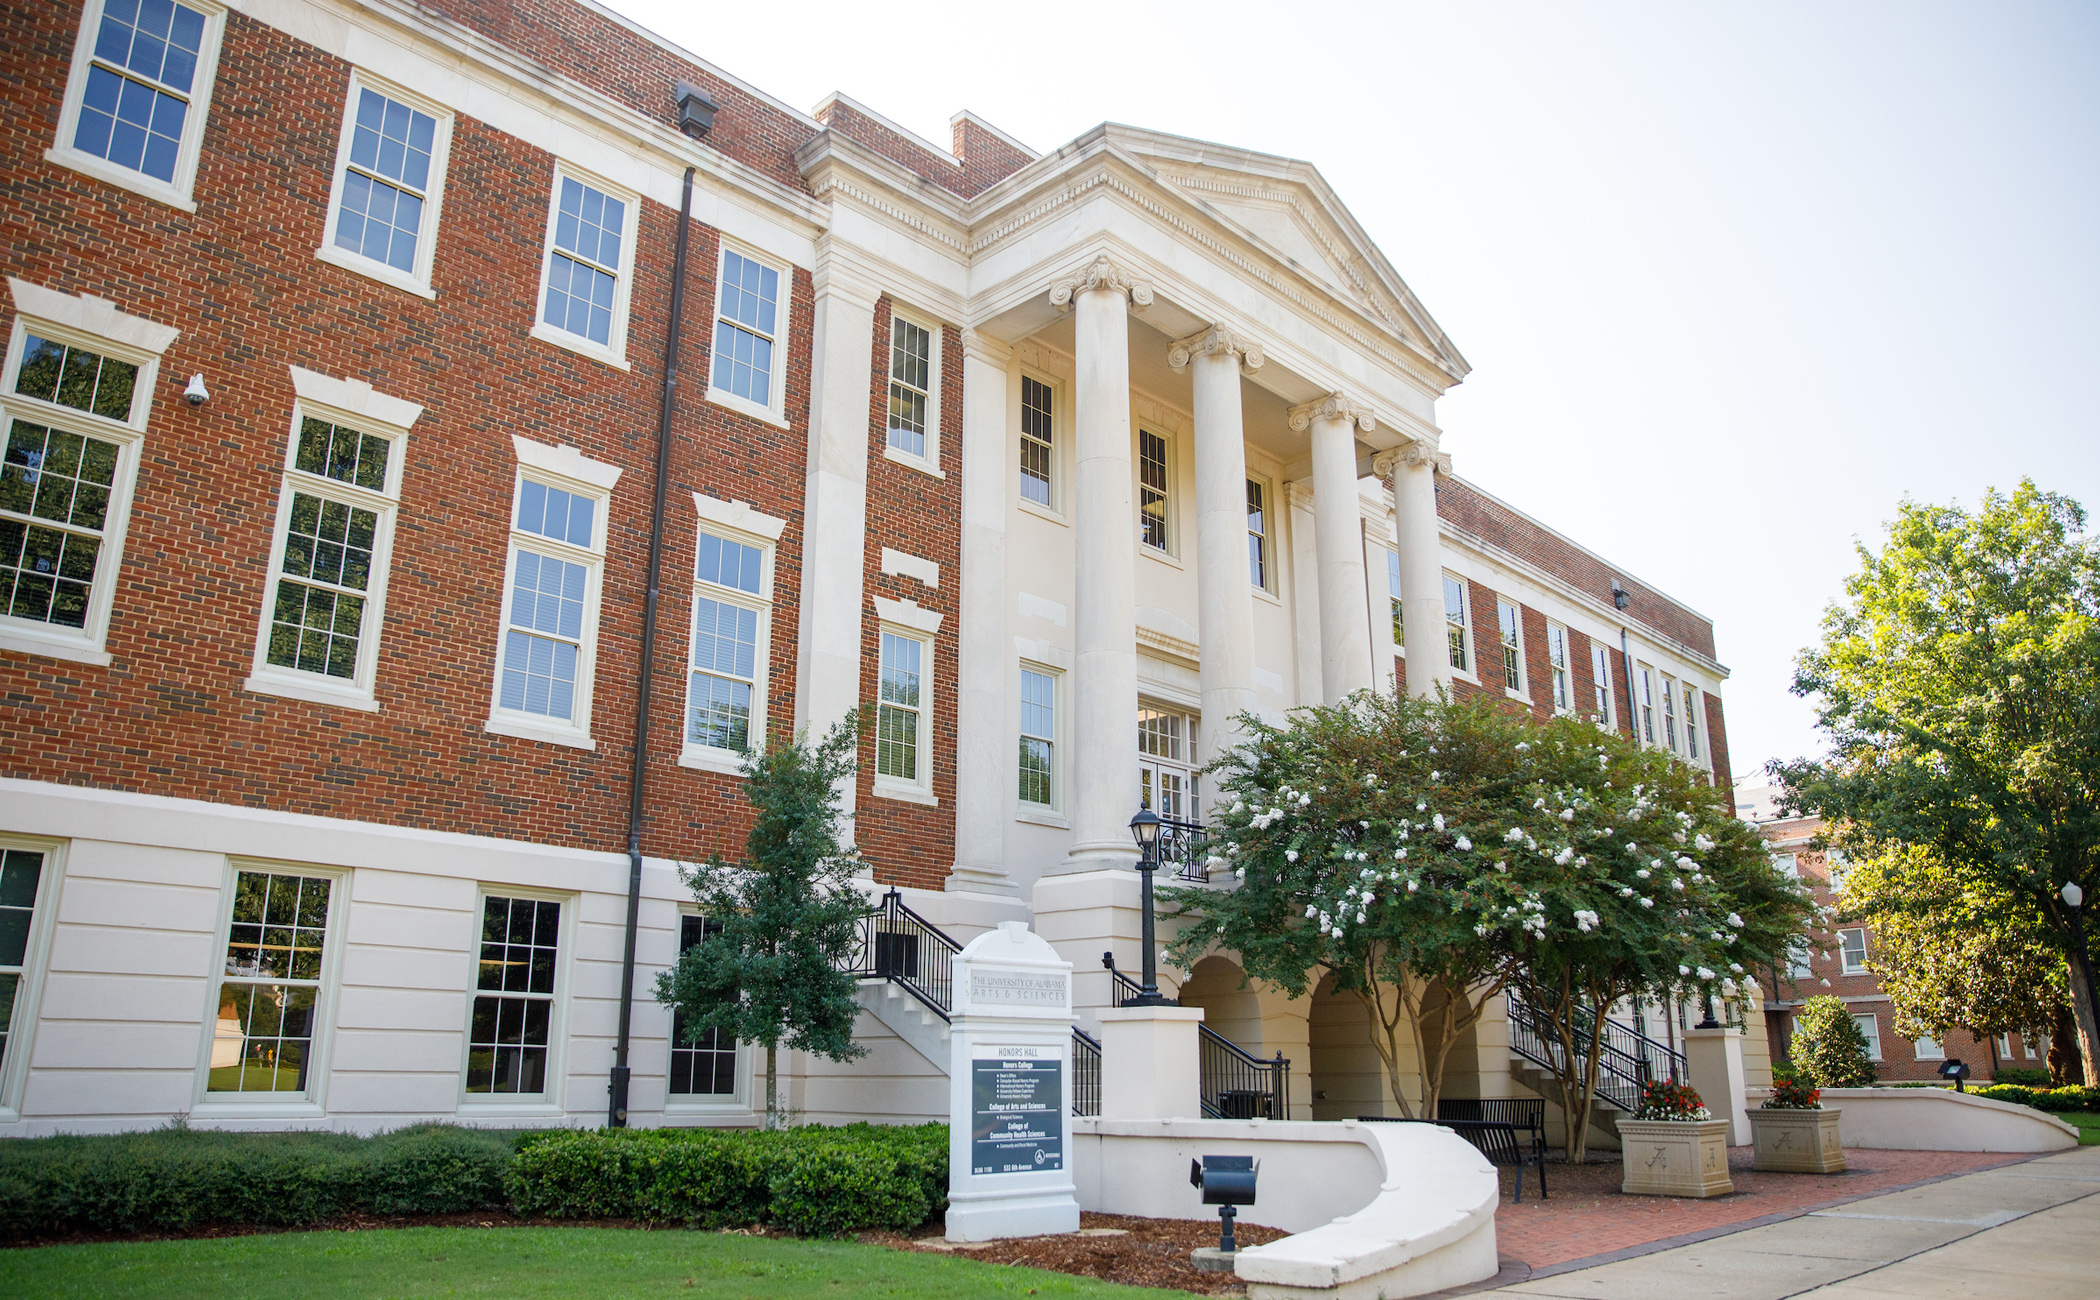 The front exterior of Honors Hall